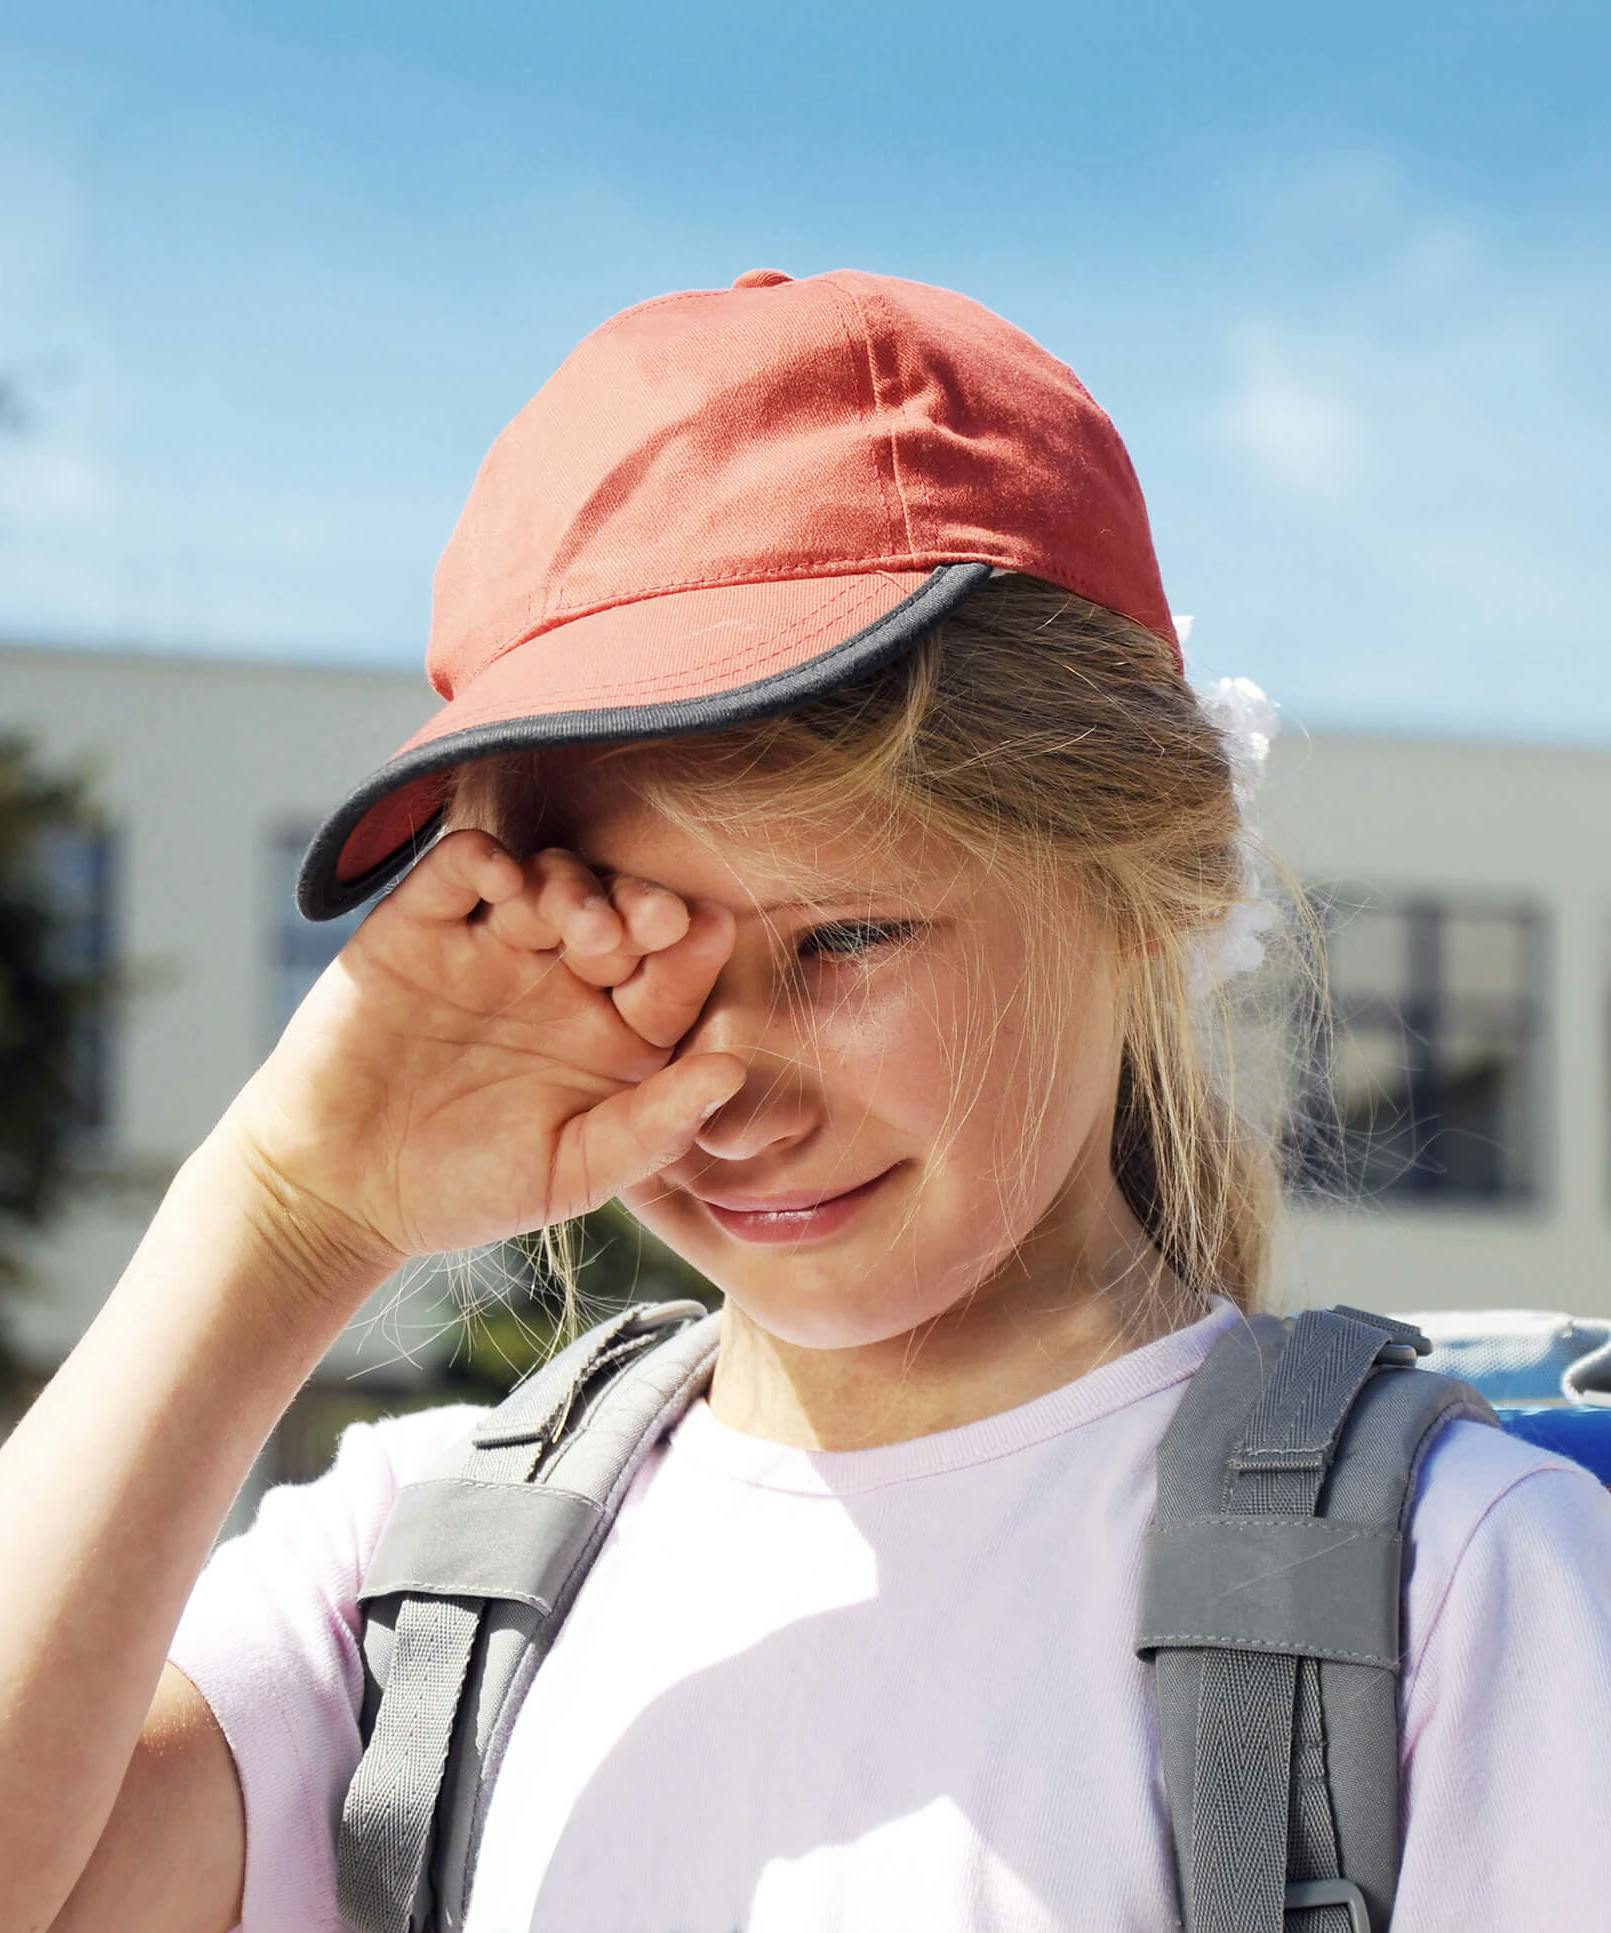 The Overdiagnosis Of ADHD Is Covering Up Trauma And Bad School Policies shutterstock